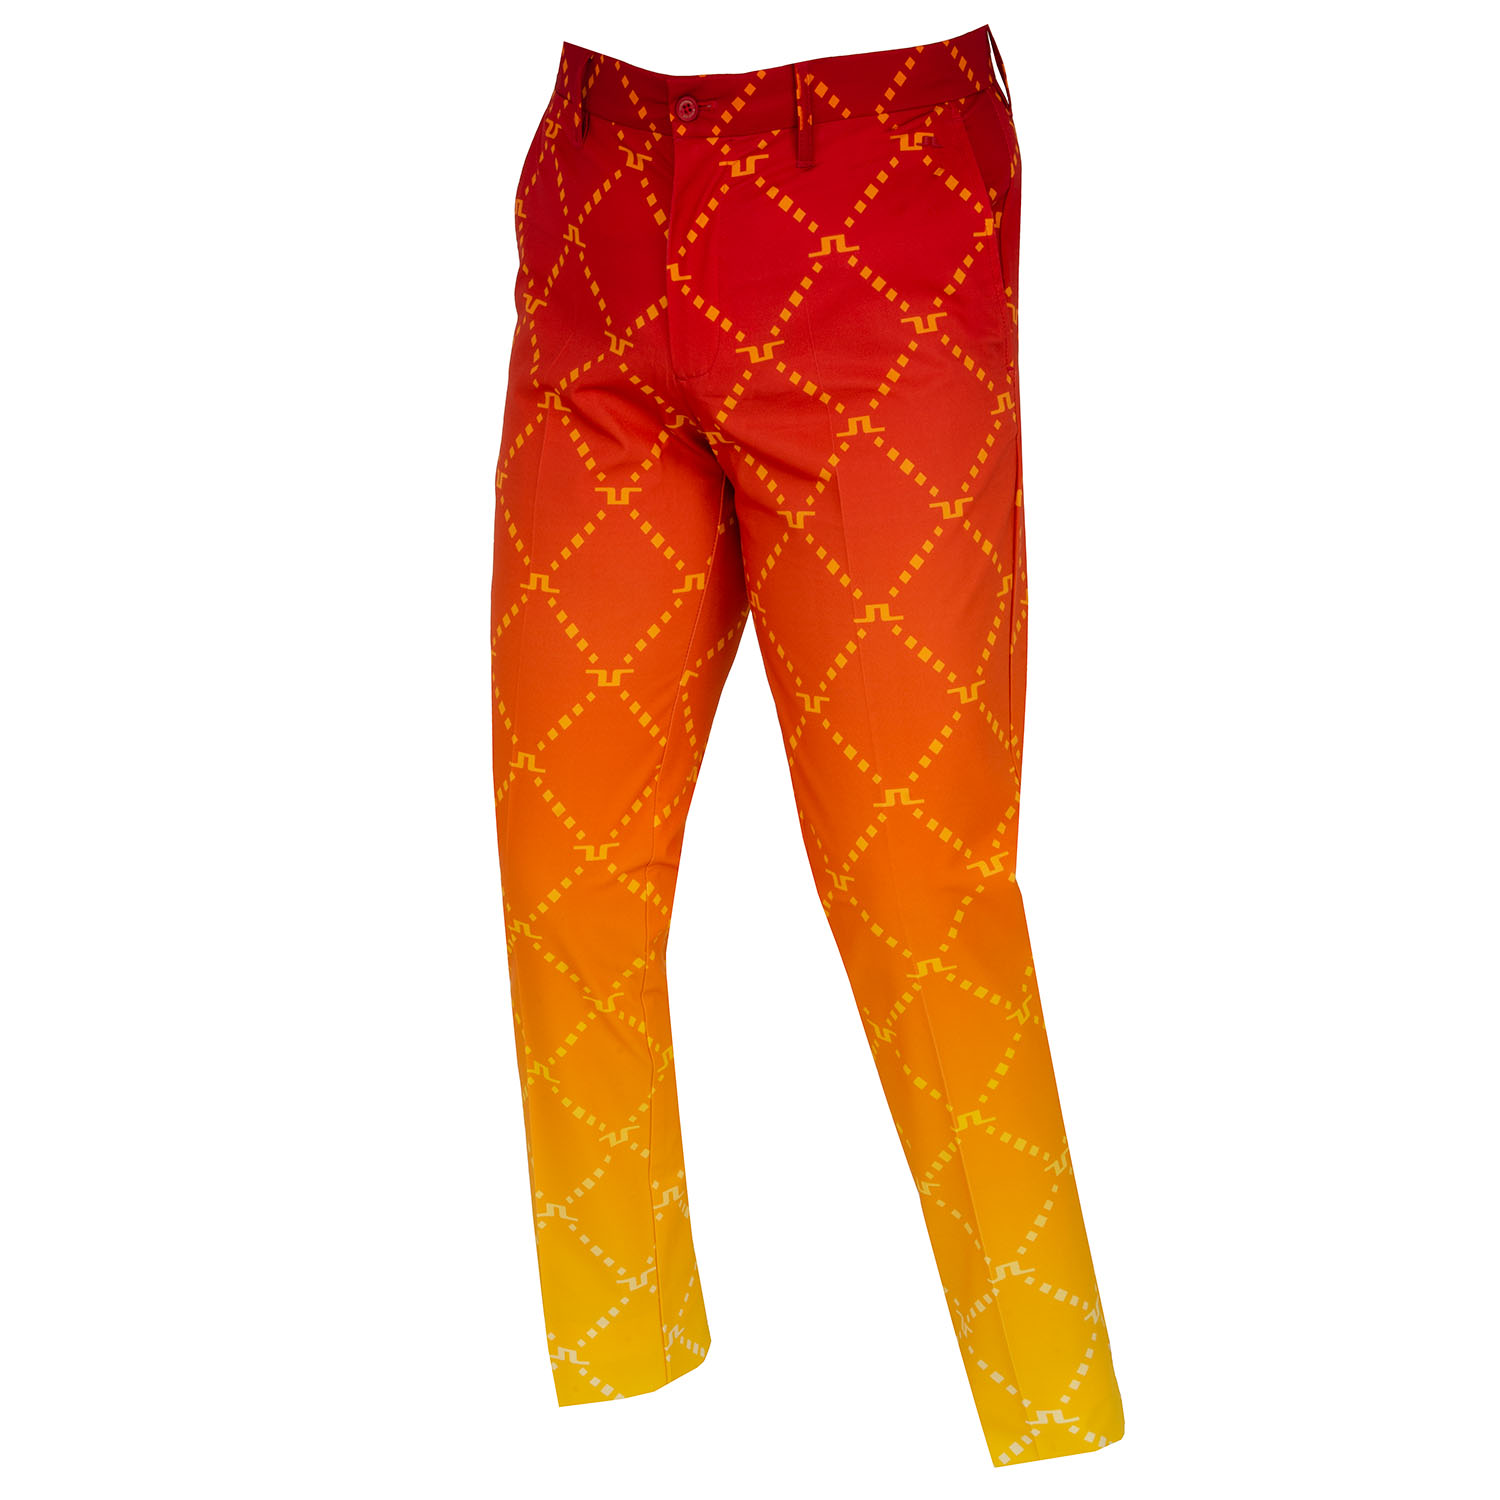 Image of J Lindeberg Fade Print Golf Trousers